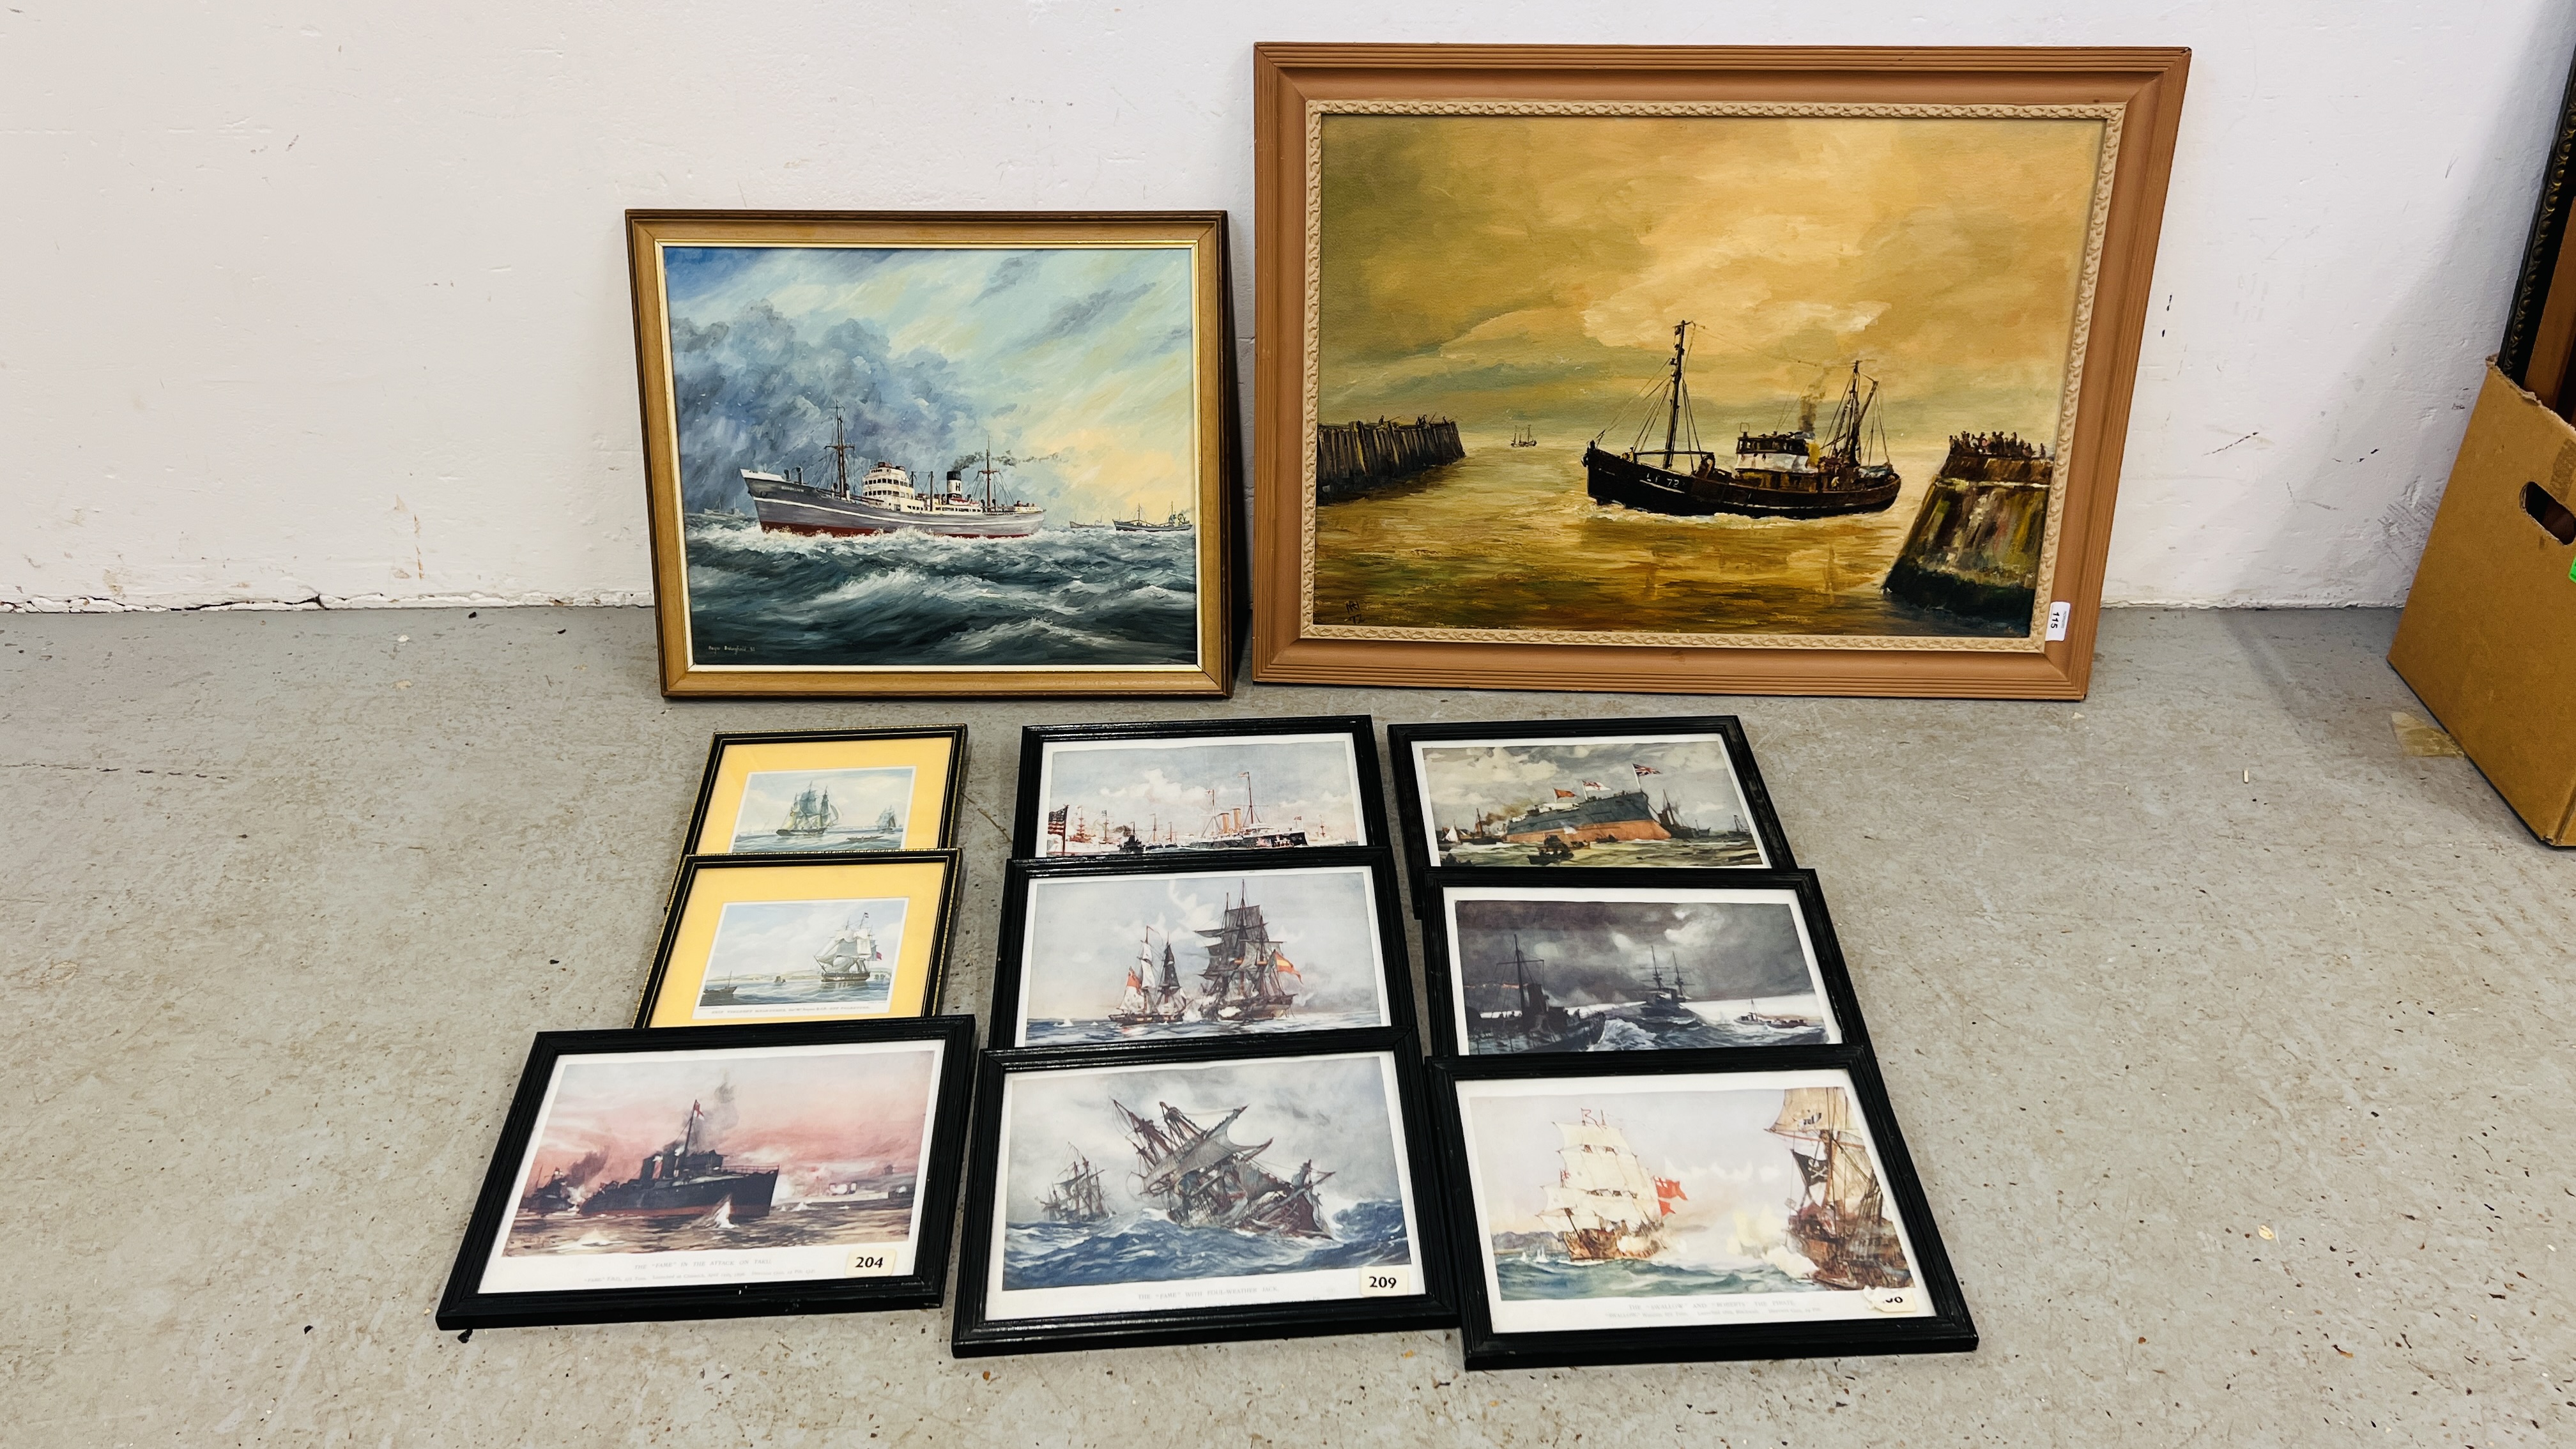 AN ORIGINAL OIL ON BOARD "LOCAL FISHING TRAWLERS" AND AN OIL ON BOARD "THE HARP AND LION" BEARING